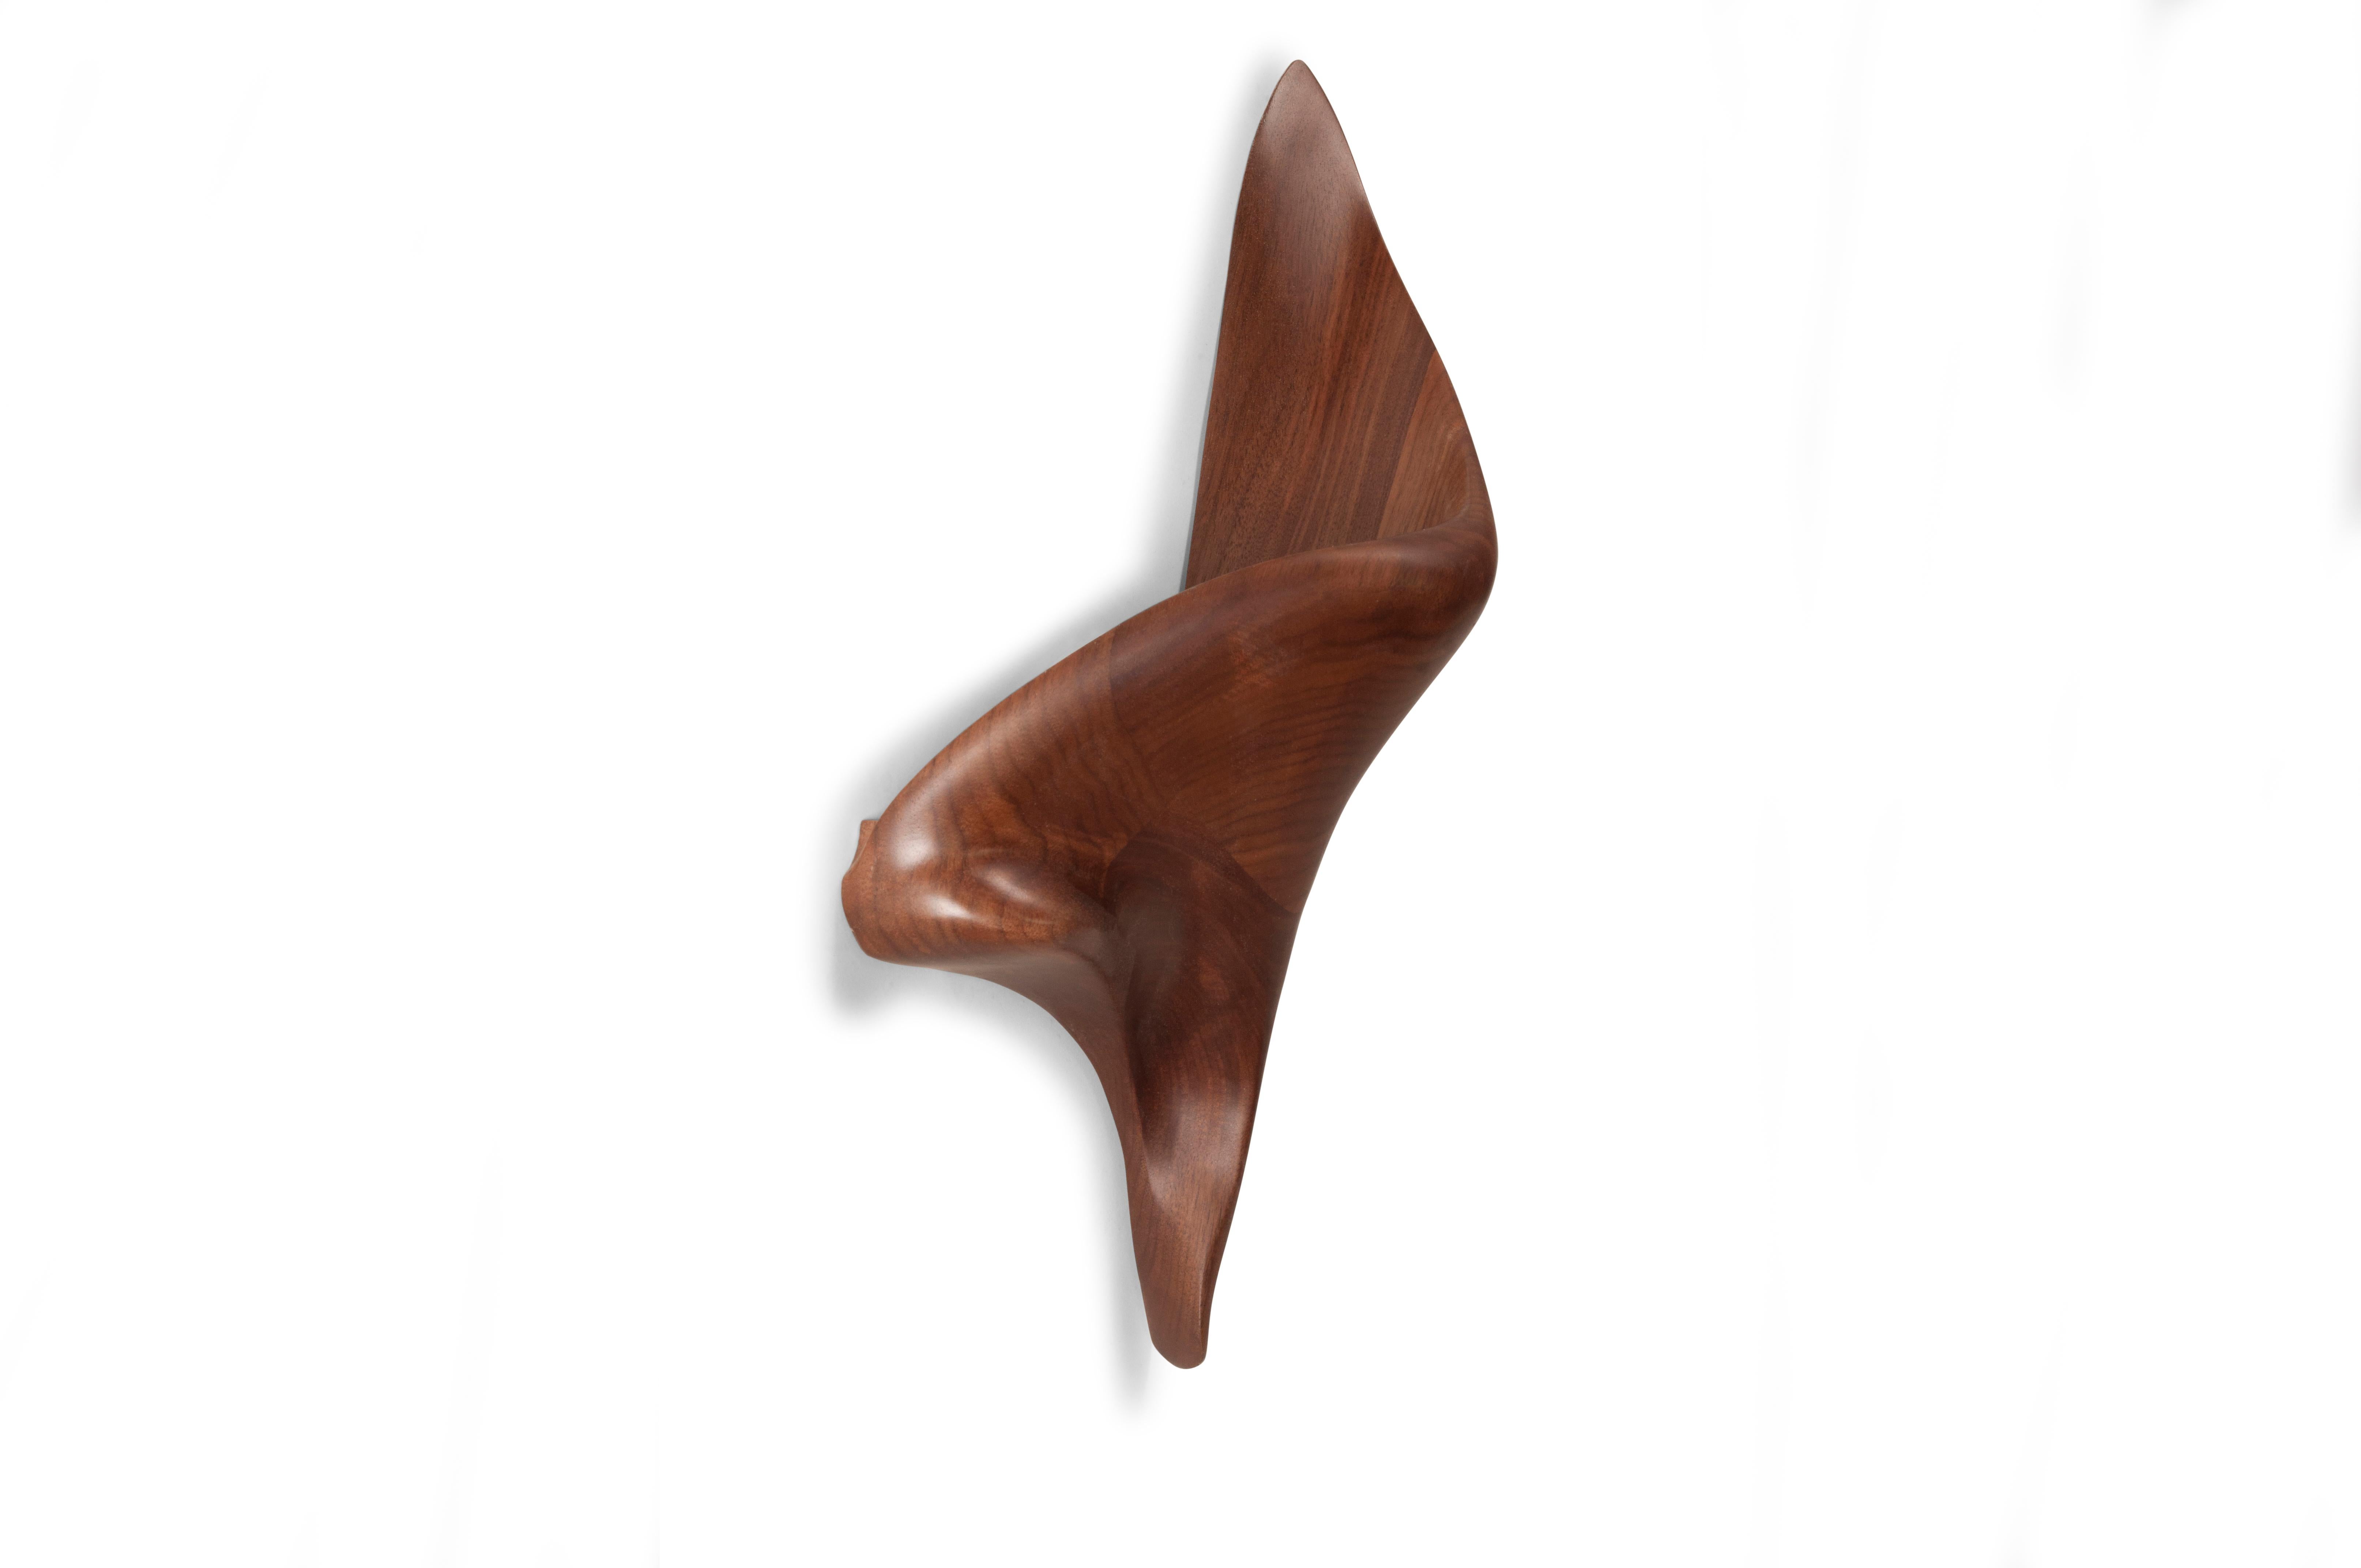 Carved Amorph Lustrous Sconce in Natural stain on Walnut Wood, Facing Right For Sale